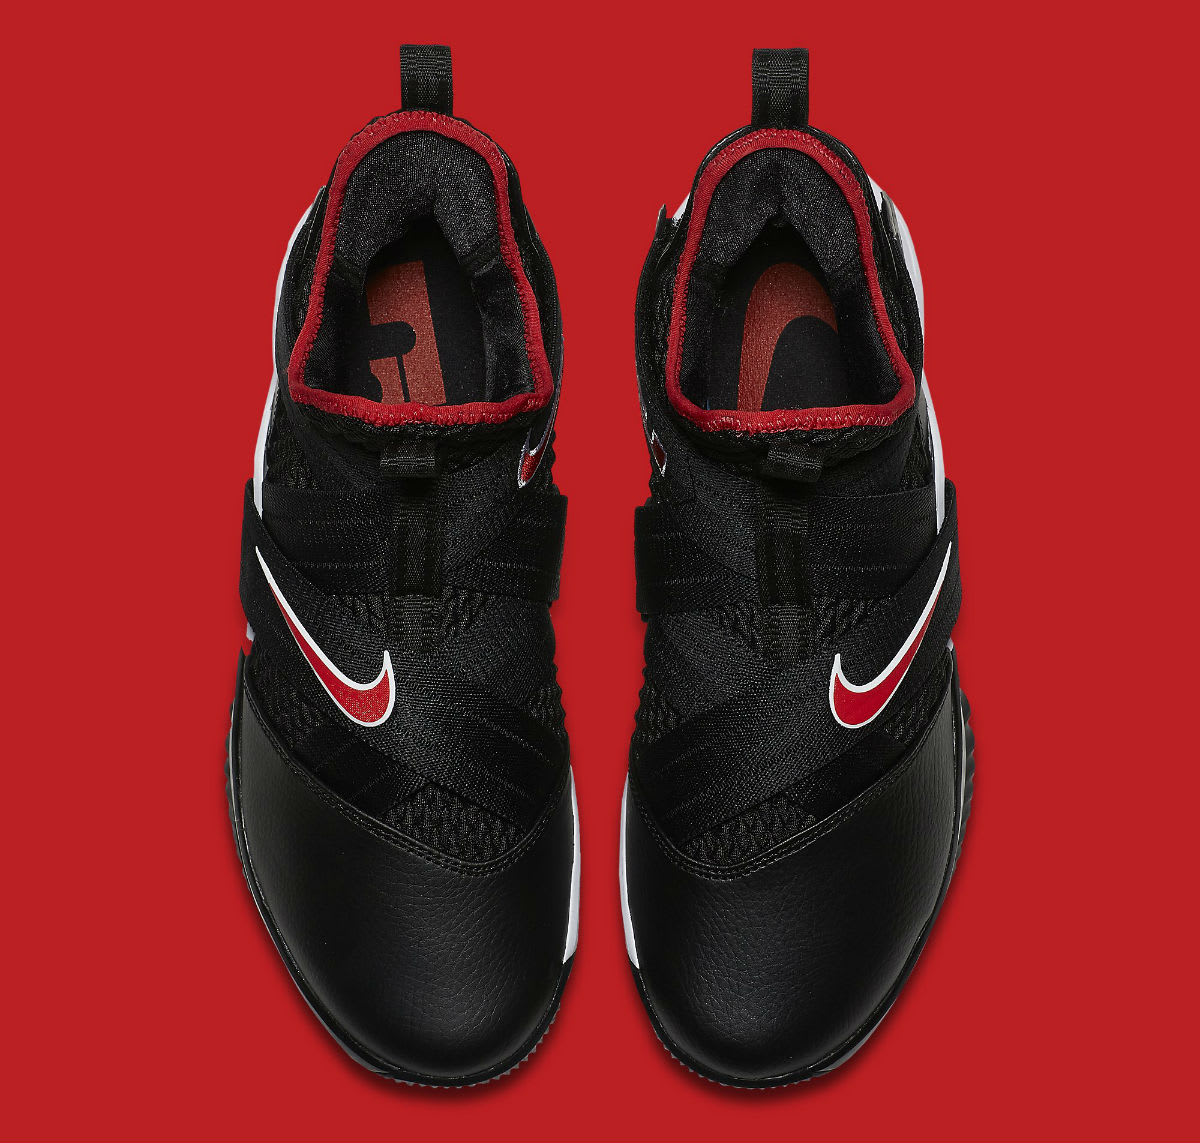 Nike LeBron Soldier 12 Bred Release Date AO4053-001 Top